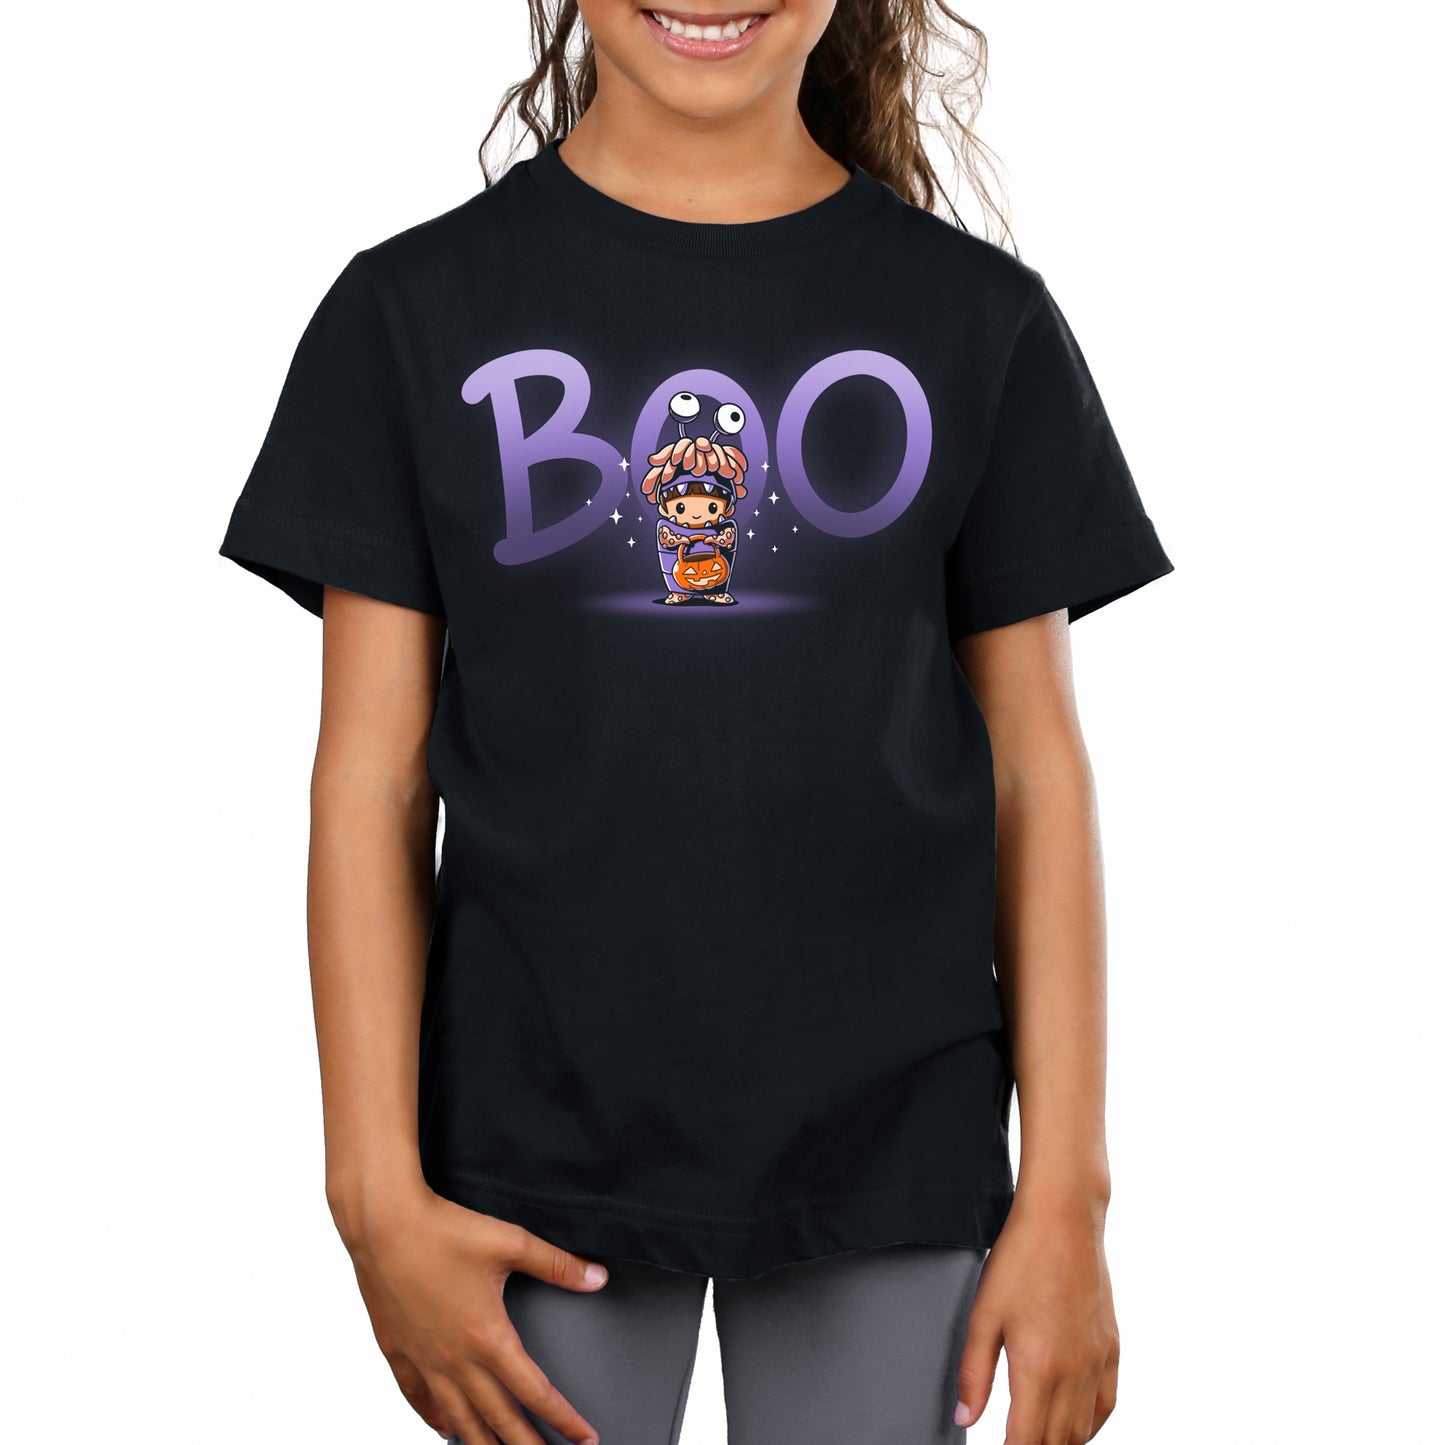 A girl wearing an officially licensed Pixar Monster's Inc black t-shirt with the word Boo's Halloween Costume on it.